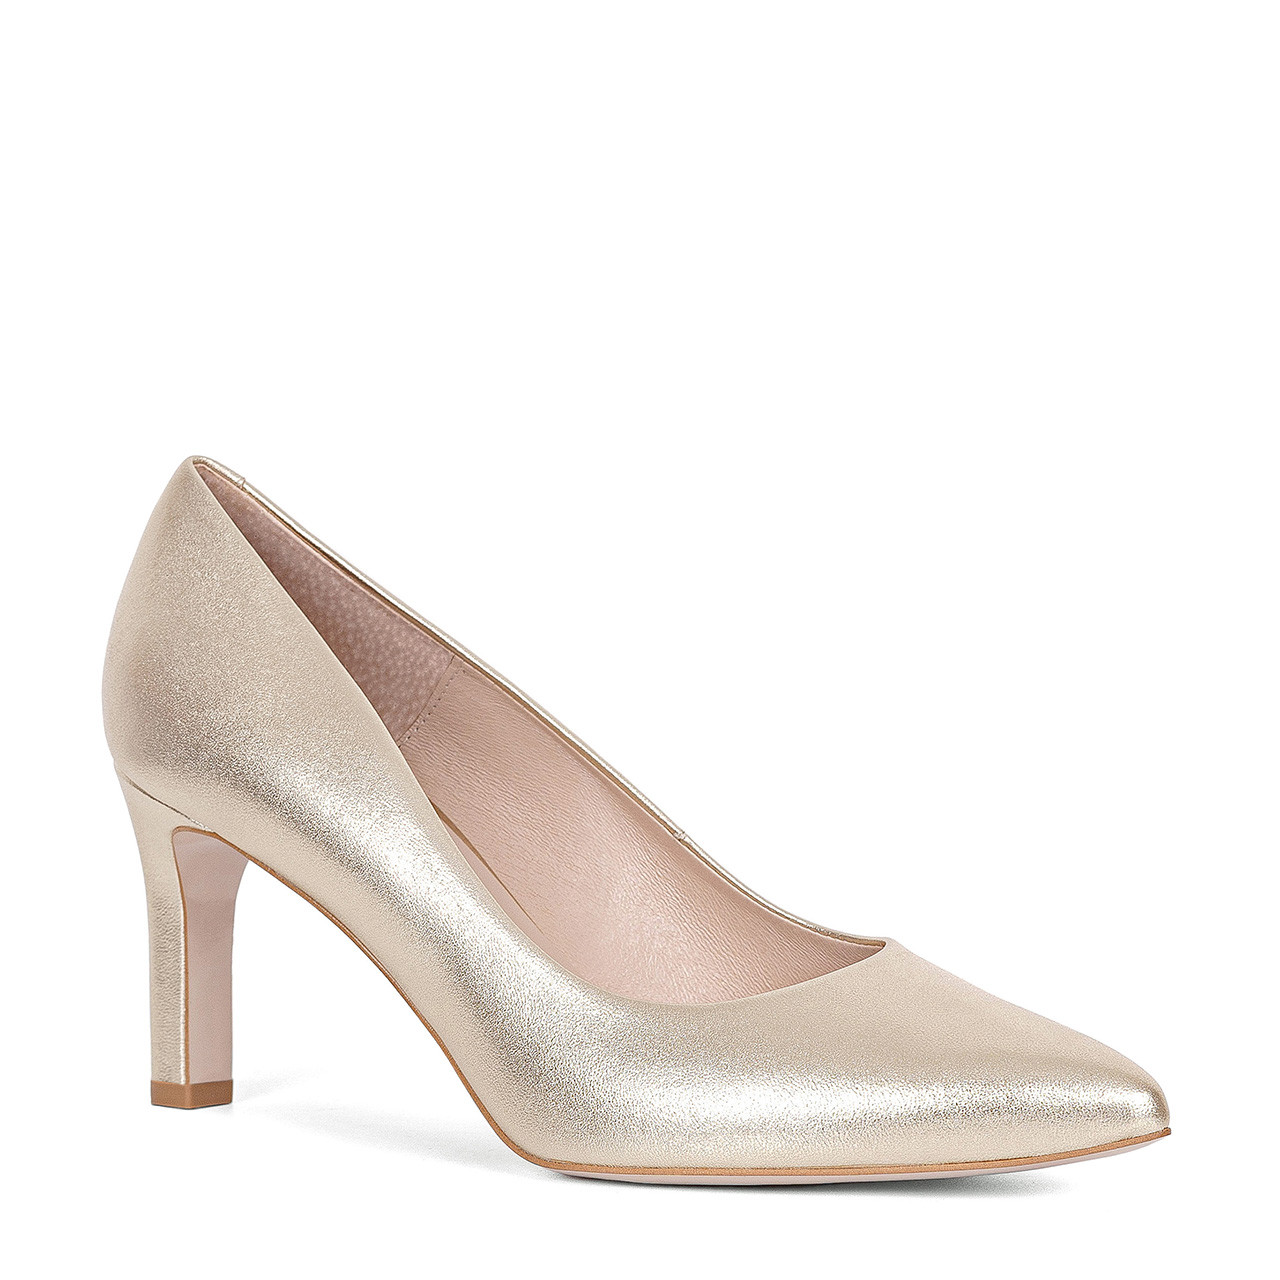 Golden pumps with a comfortable high stiletto heel made of natural grain leather